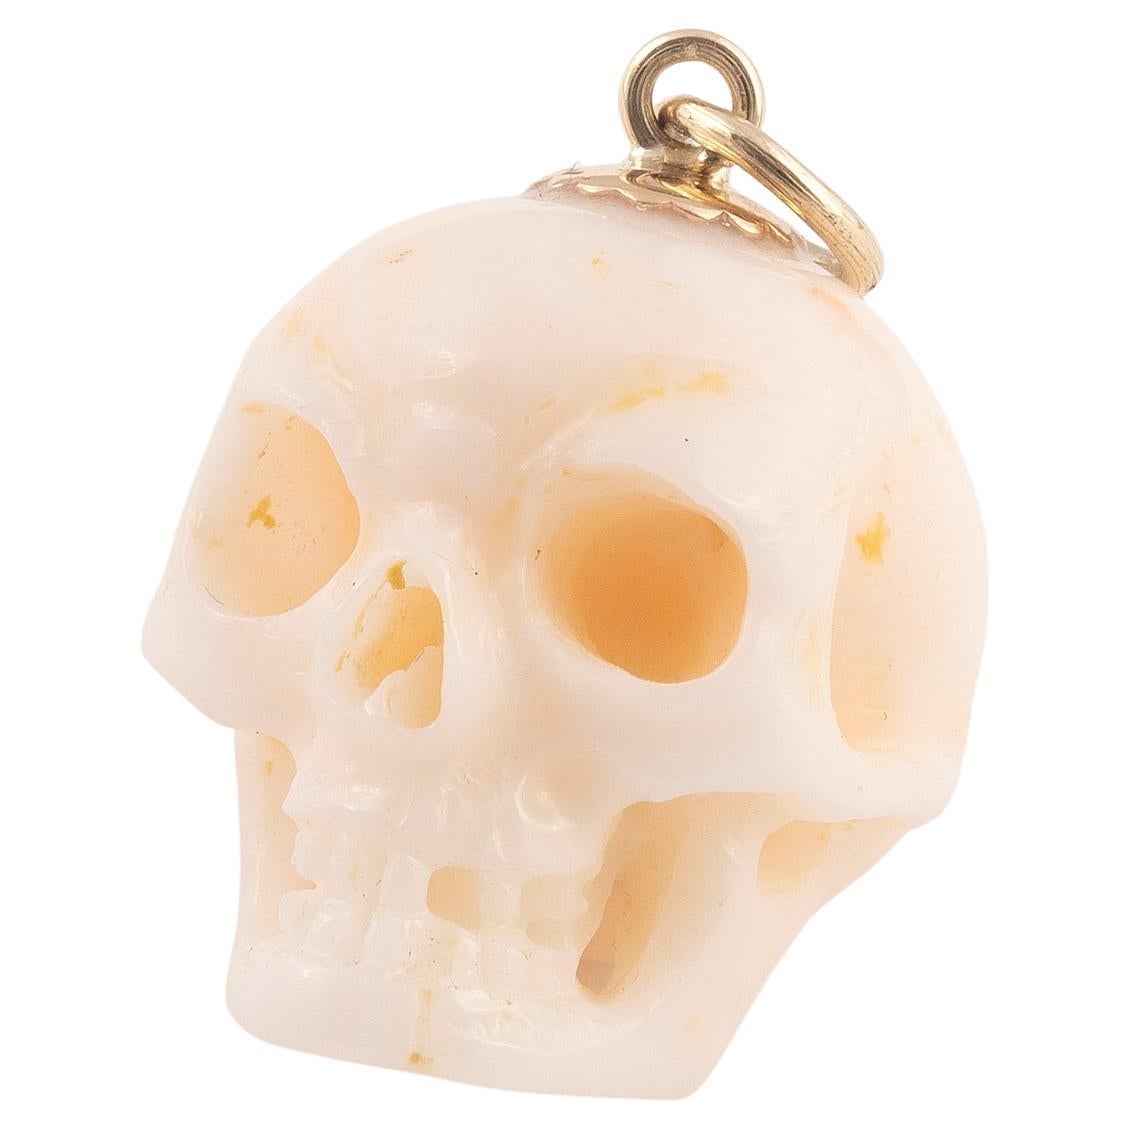 Depicting the skull in white coral mounted in yellow gold pendant.
Height : 1.5cm
